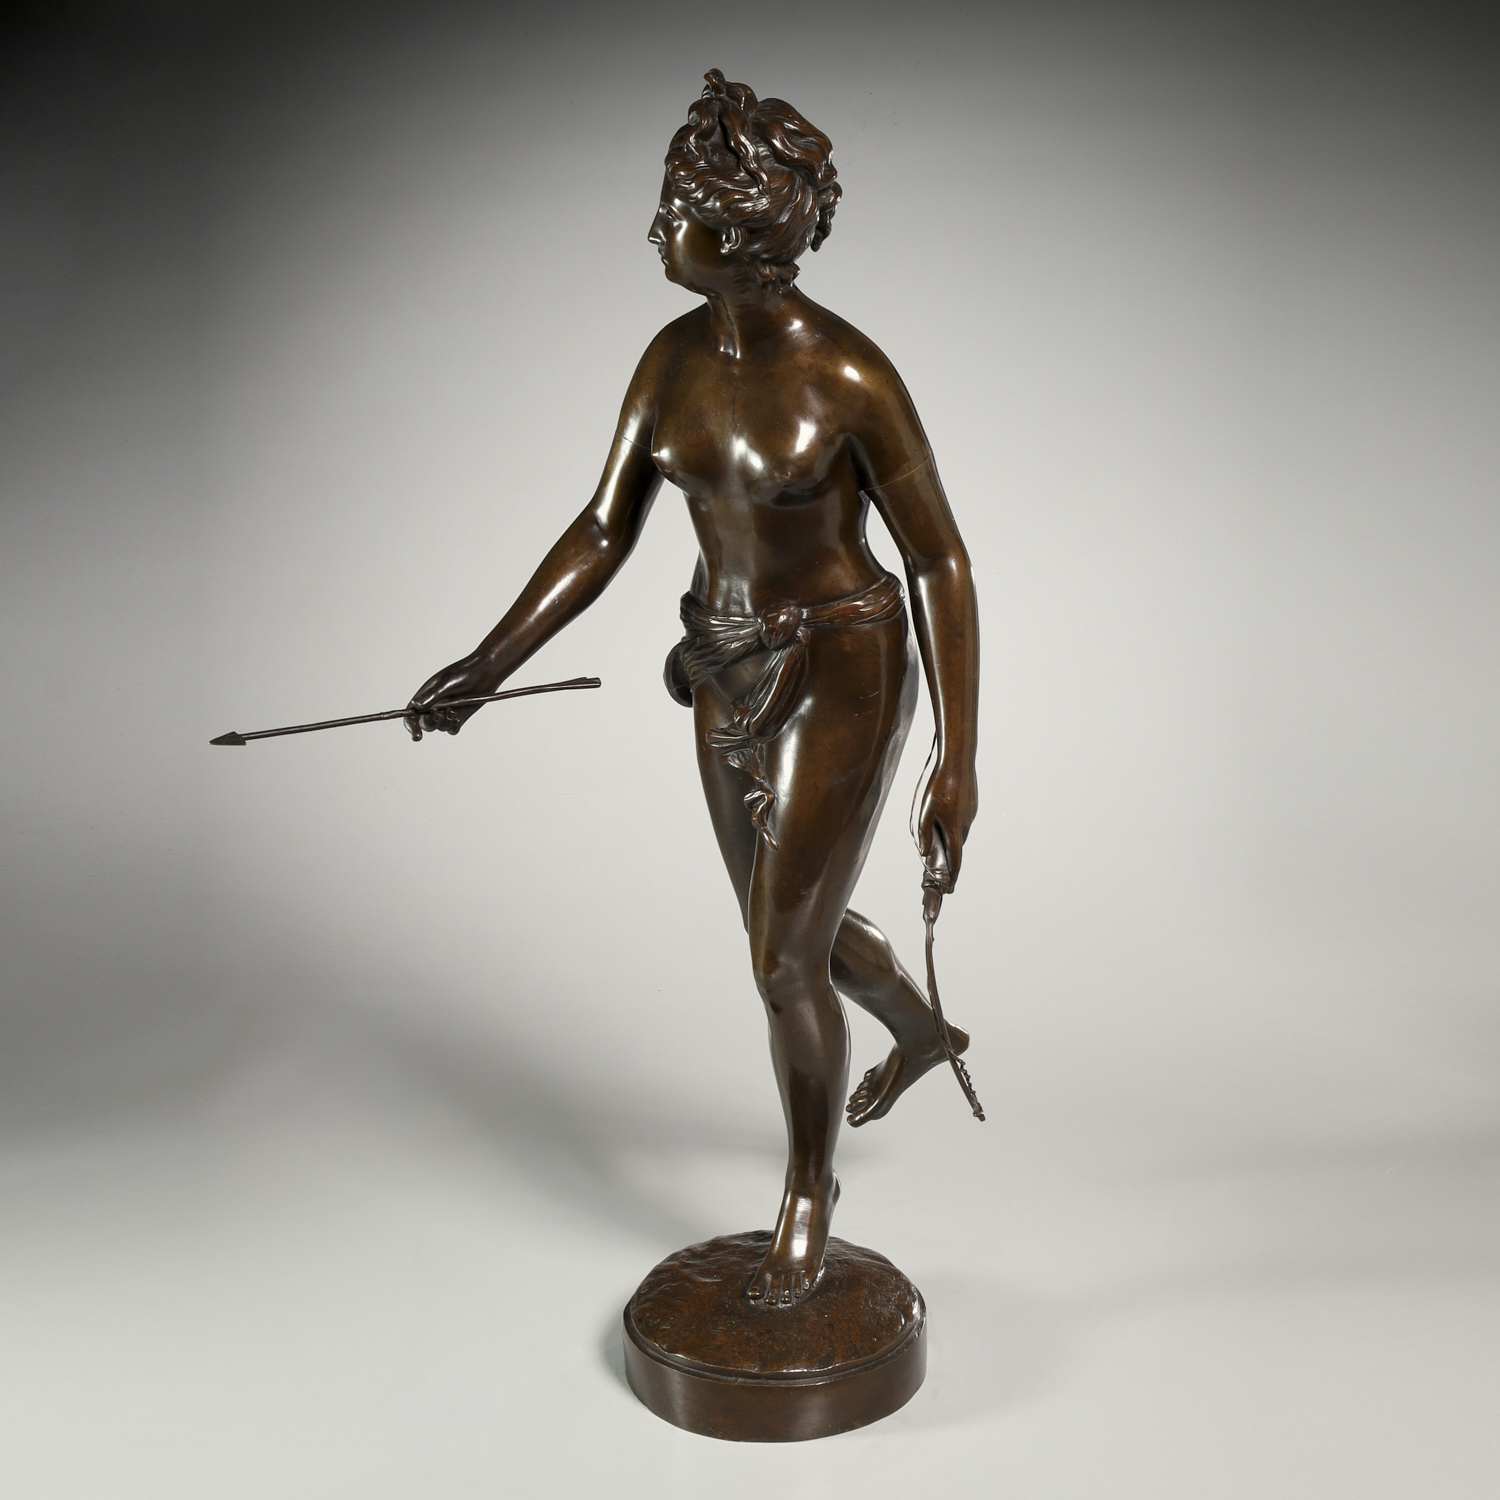 HOUDON AFTER LARGE PATINATED 3c266c